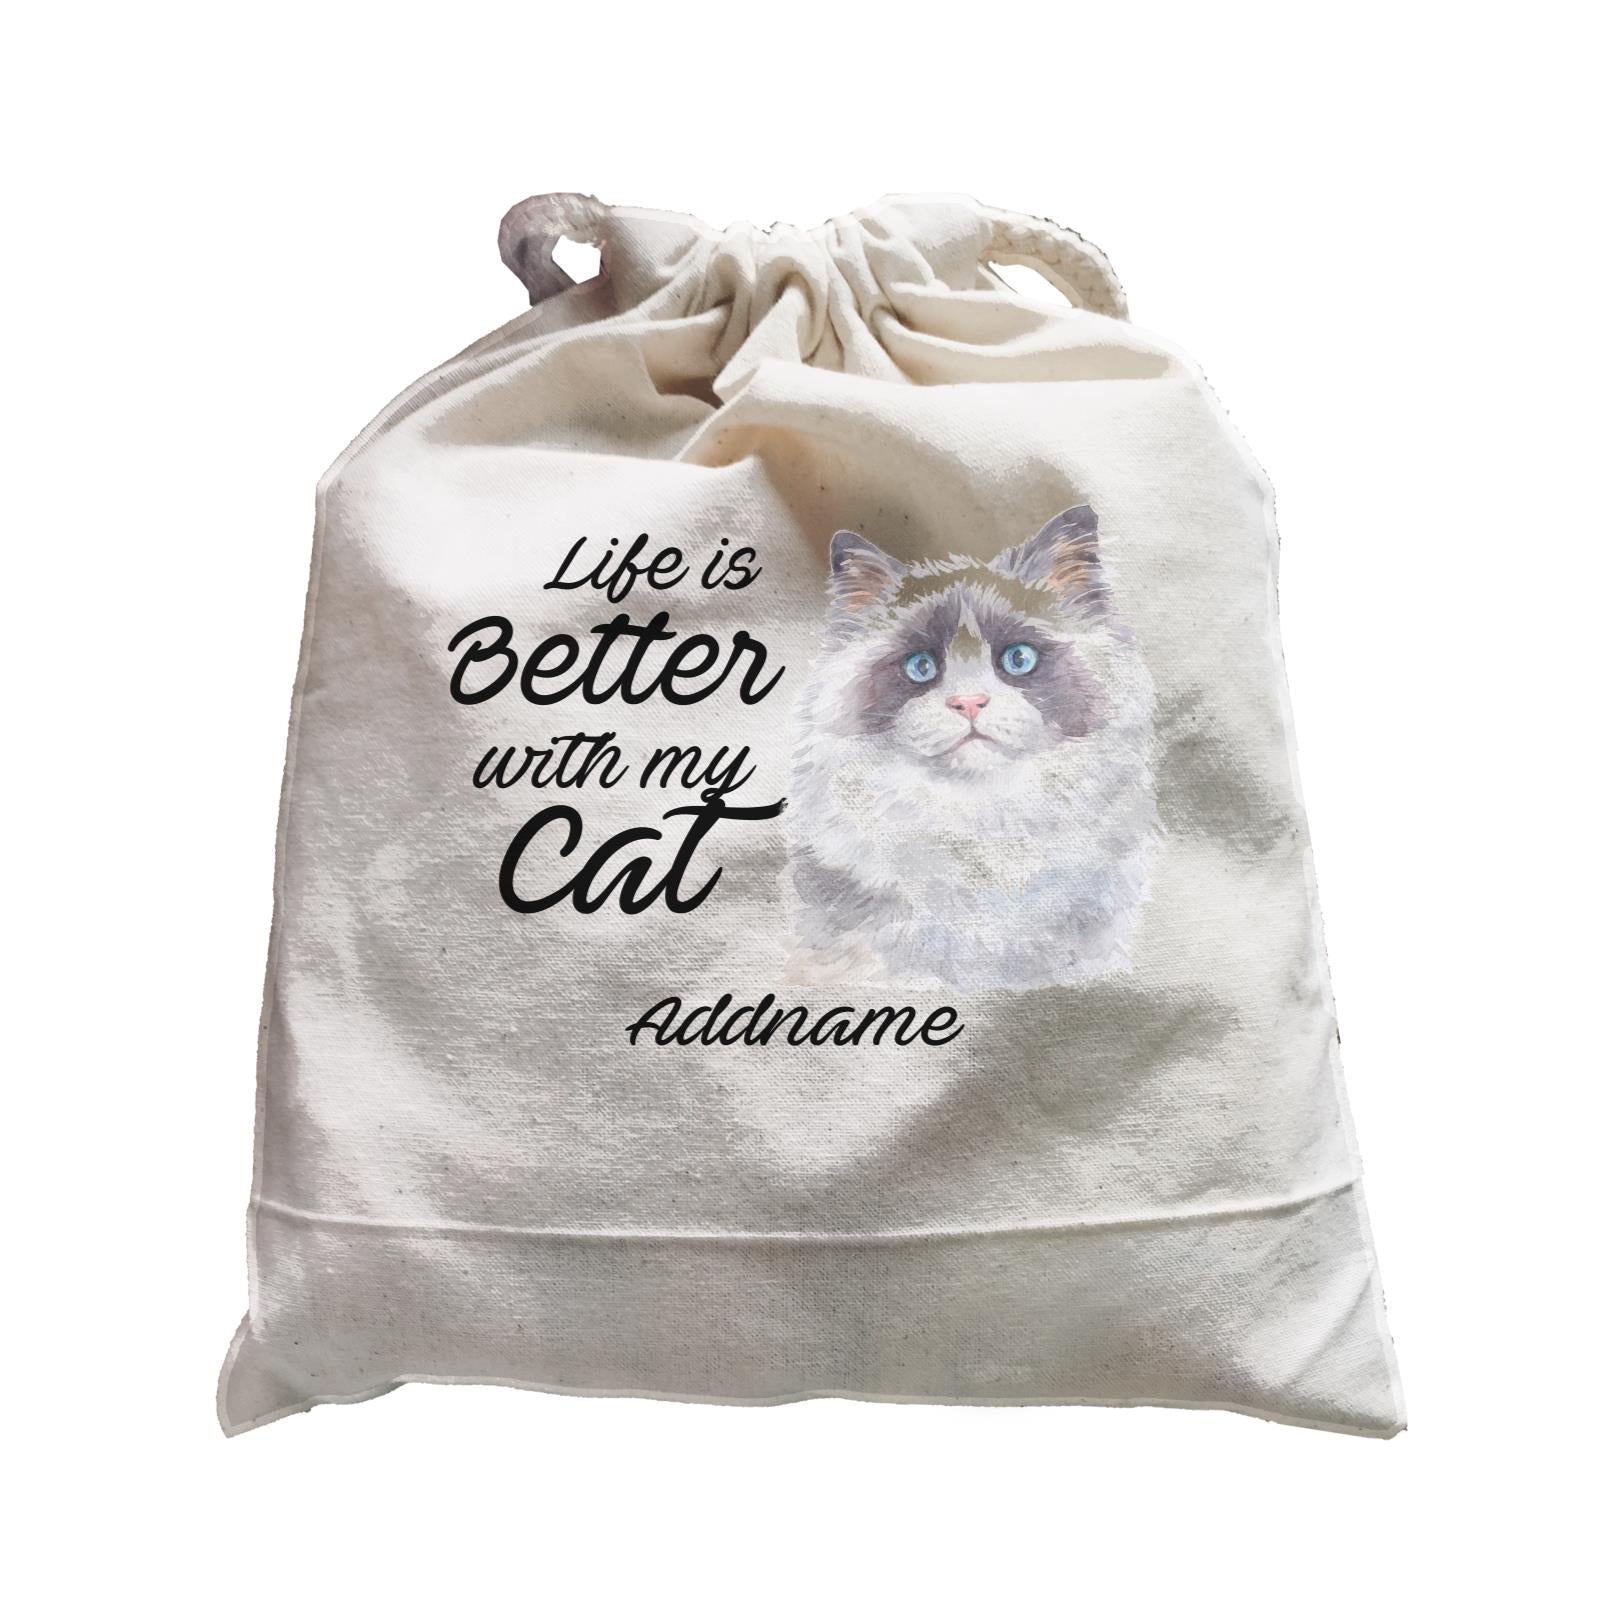 Watercolor Life is Better With My Cat Ragdoll Cat Addname Satchel